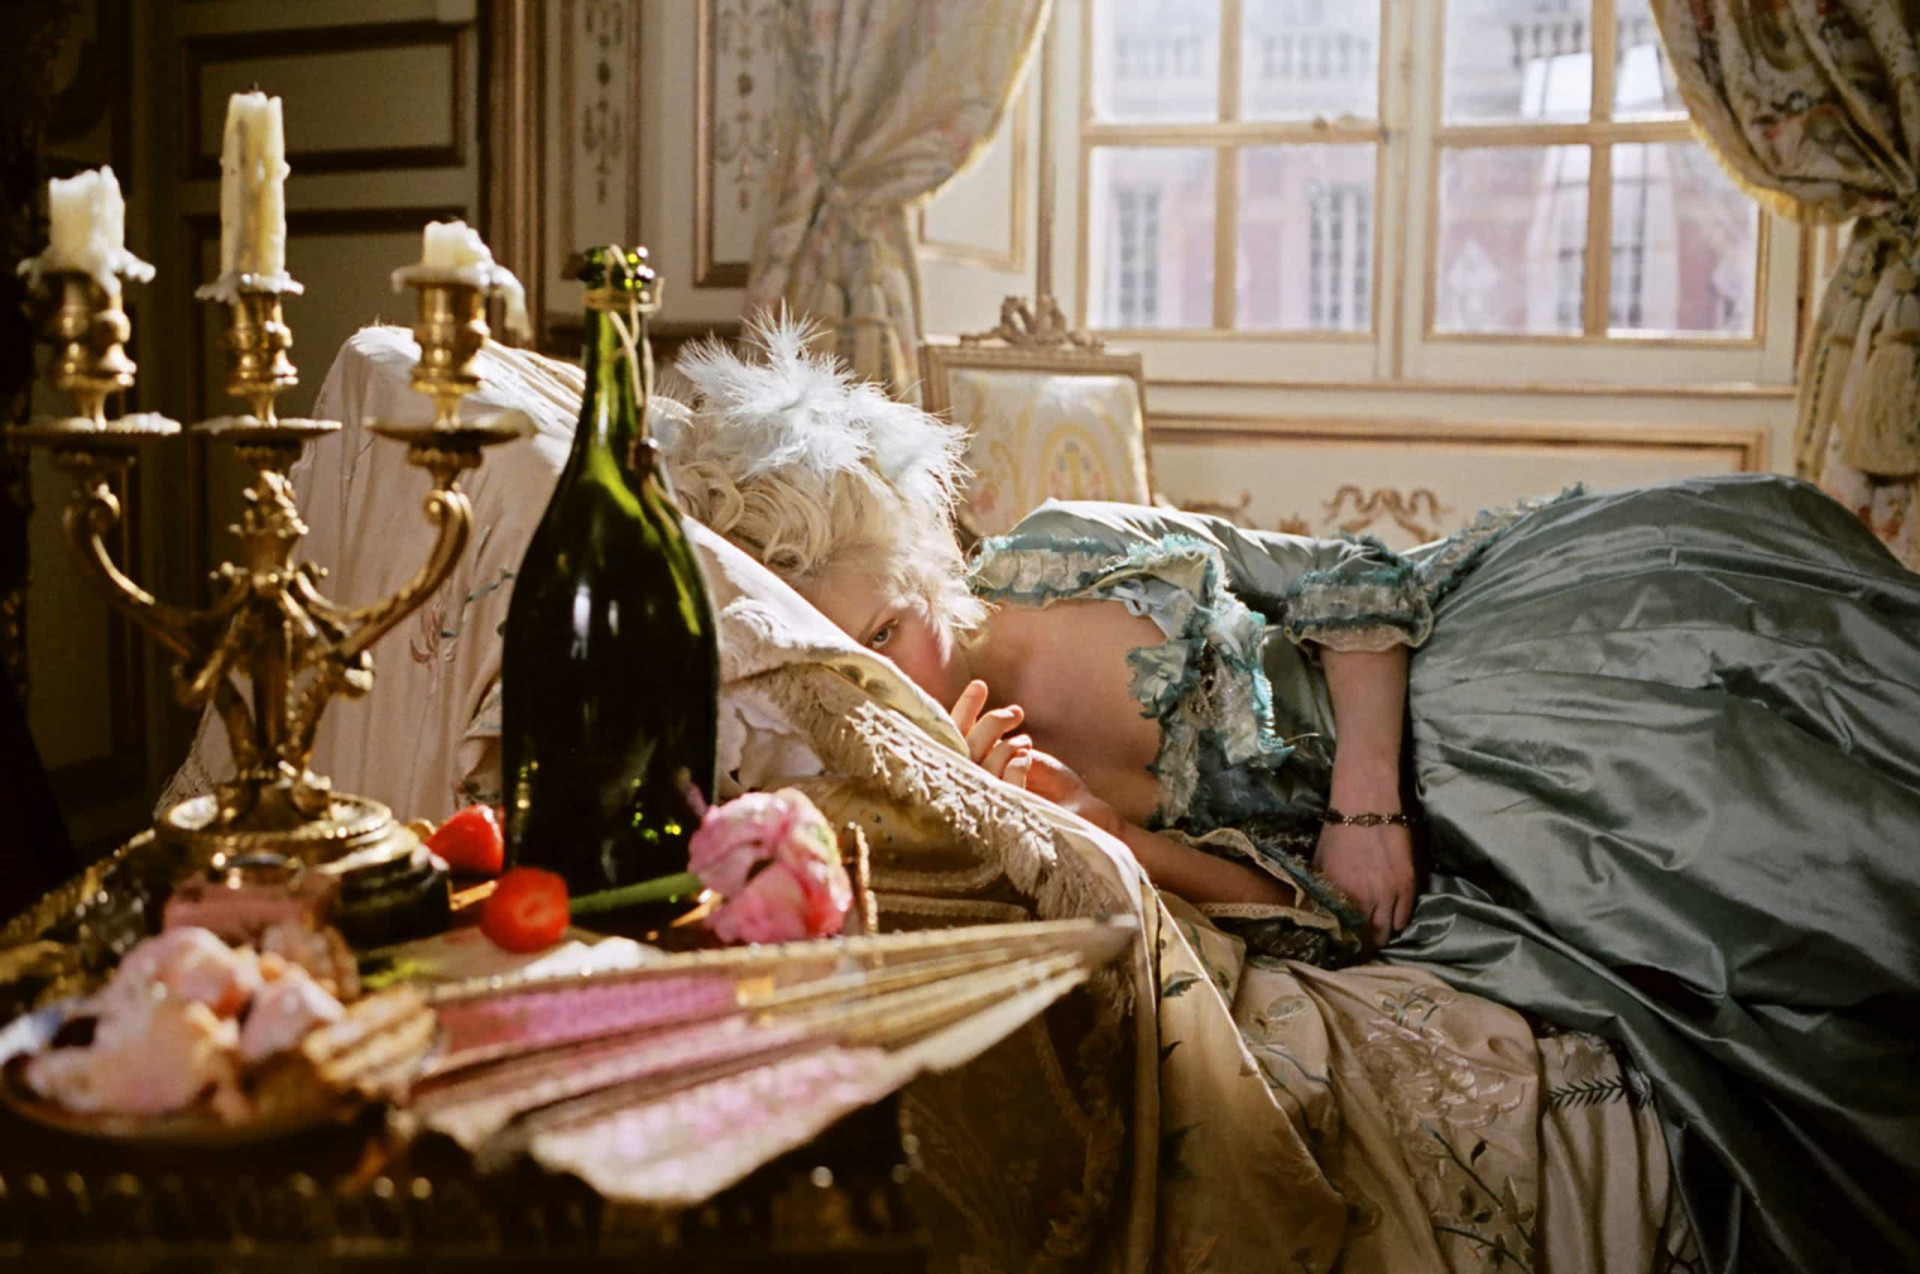 <p>Sofia Coppola directs this ravishing biopic of the life of Marie Antoinette. She was the wife of Louis XVI, who was beheaded in 1793. Full of indulgence, infidelity, and beautiful costumes, this film will make you feel like you're in the French Court.</p><p><a href="https://www.msn.com/en-us/community/channel/vid-7xx8mnucu55yw63we9va2gwr7uihbxwc68fxqp25x6tg4ftibpra?cvid=94631541bc0f4f89bfd59158d696ad7e">Follow us and access great exclusive content every day</a></p>